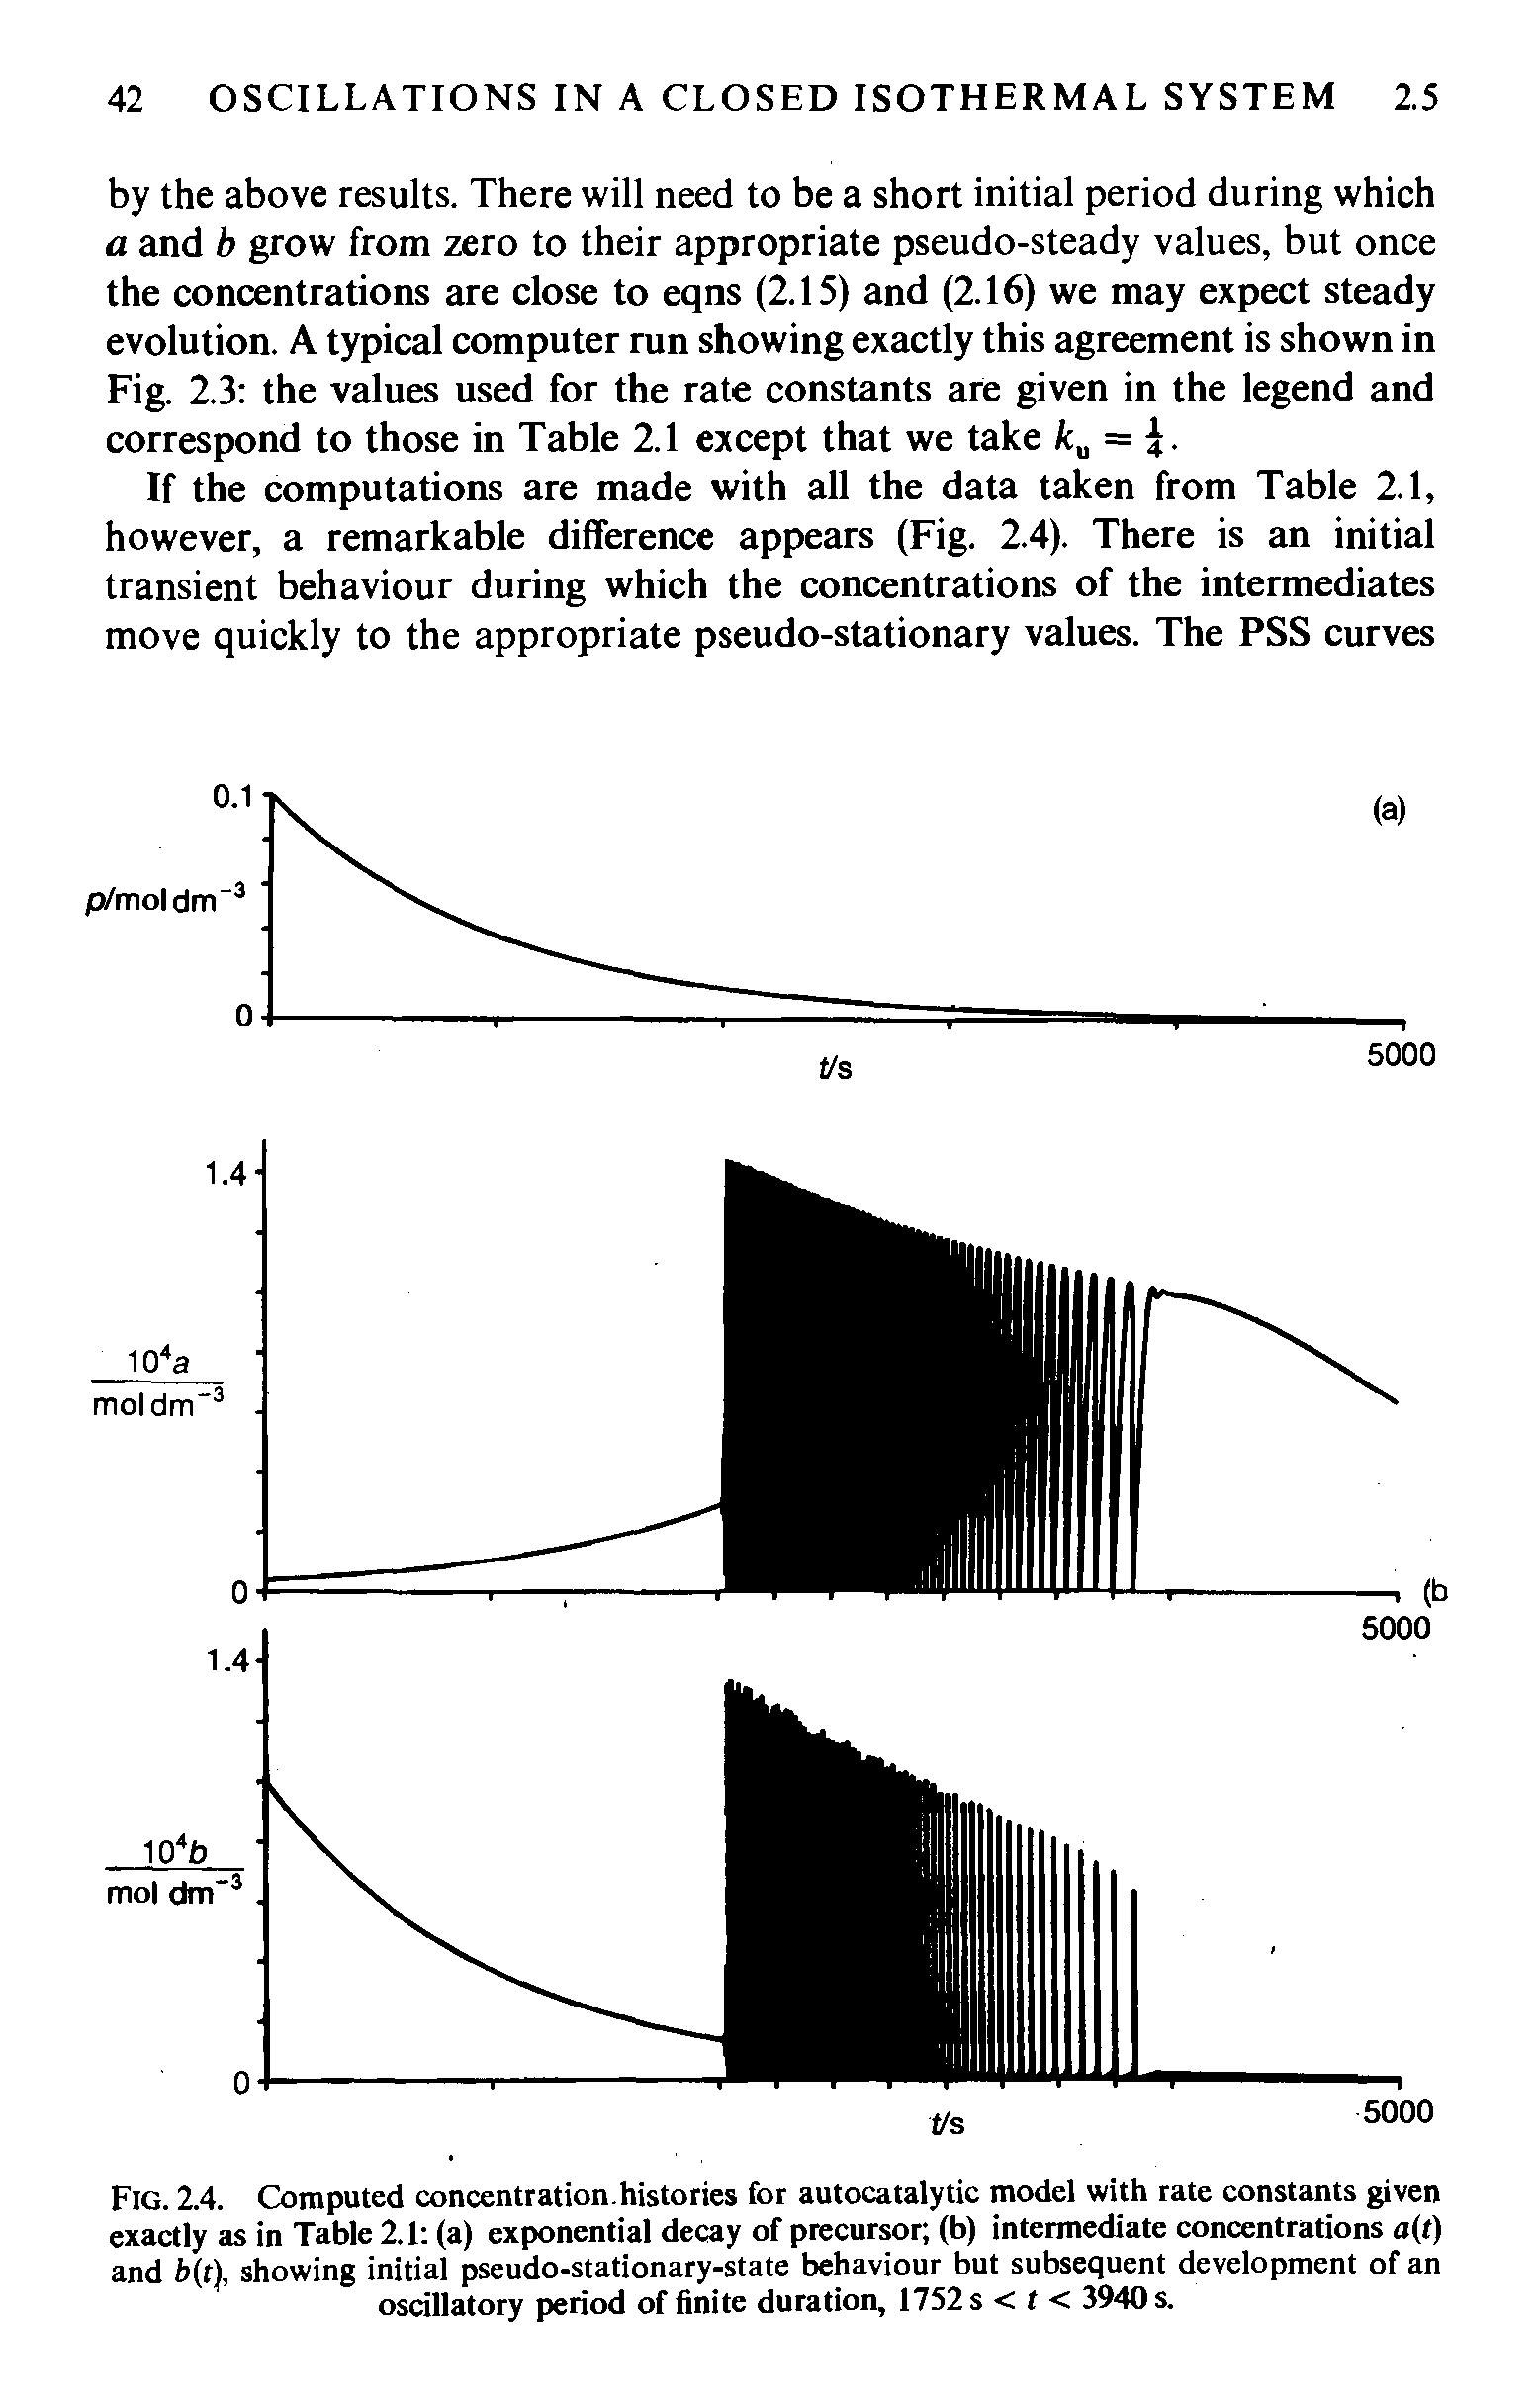 Fig. 2.4. Computed concentration.histories for autocatalytic model with rate constants given exactly as in Table 2.1 (a) exponential decay of precursor (b) intermediate concentrations a(t) and 6(r), showing initial pseudo-stationary-state behaviour but subsequent development of an oscillatory period of finite duration, 1752 s < t < 3940 s.